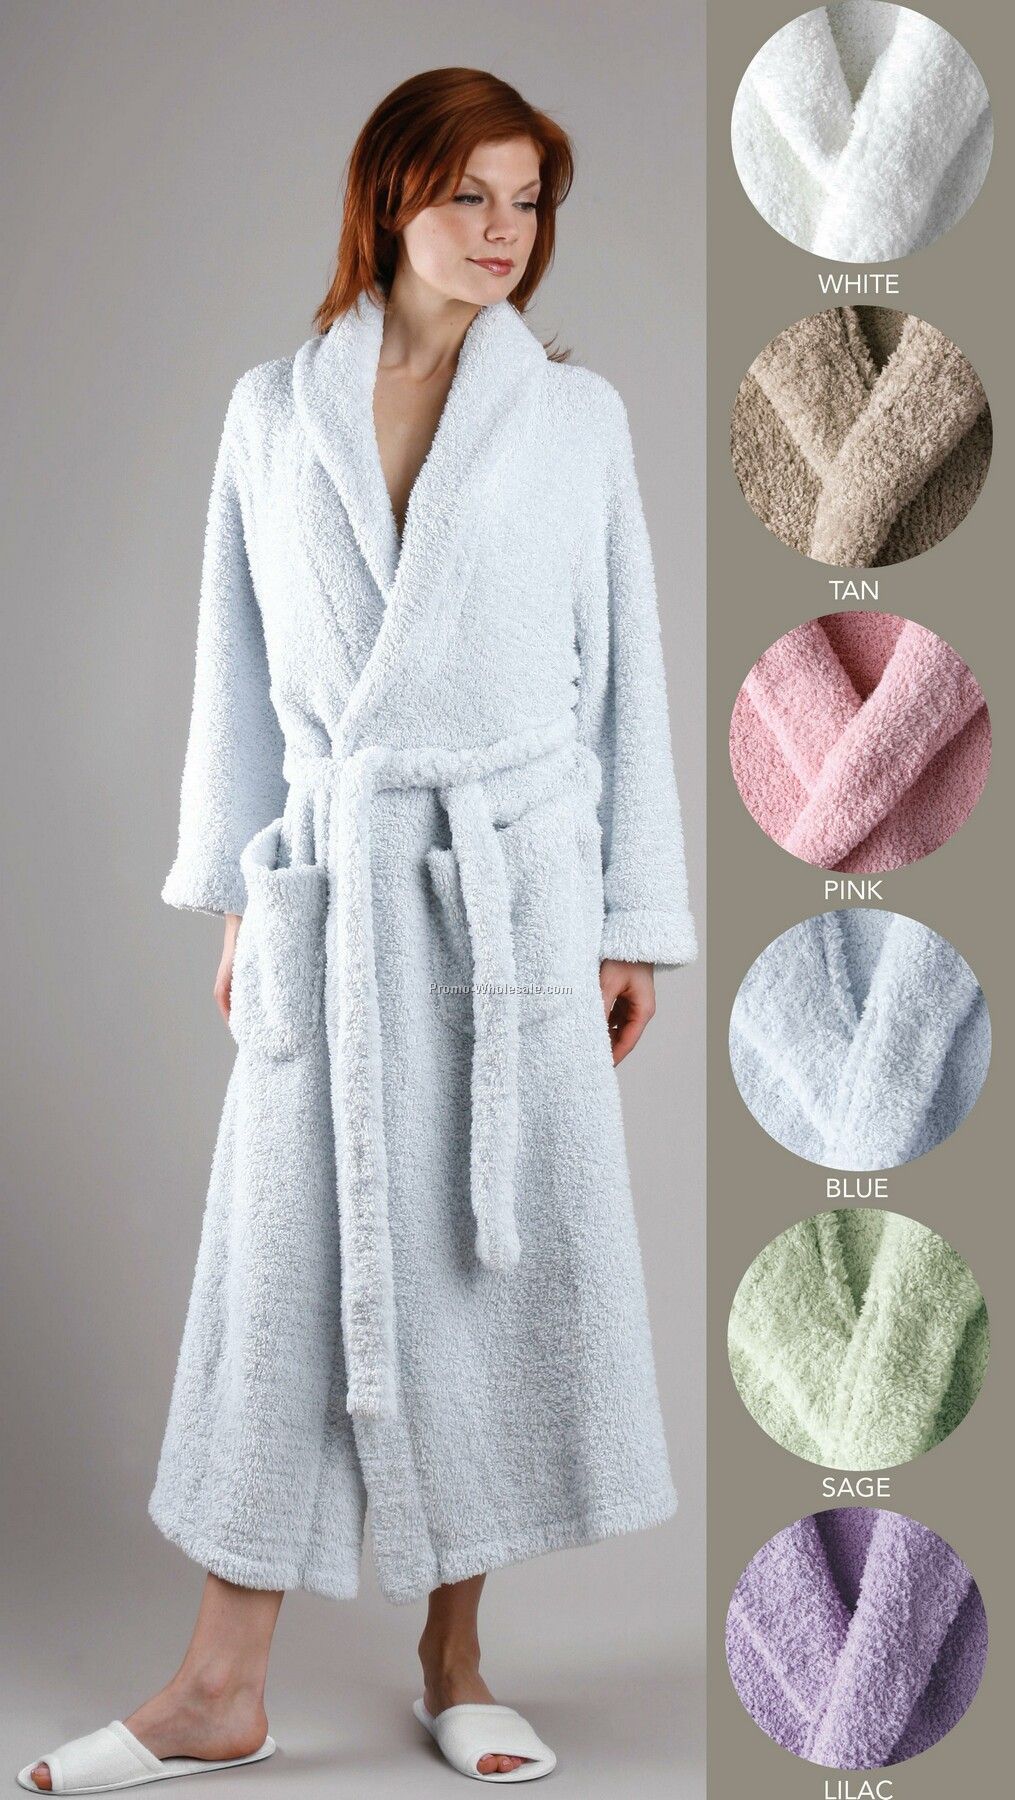 Chenille / Cashmere-like Hand Knit Shawl Robe (S-l)